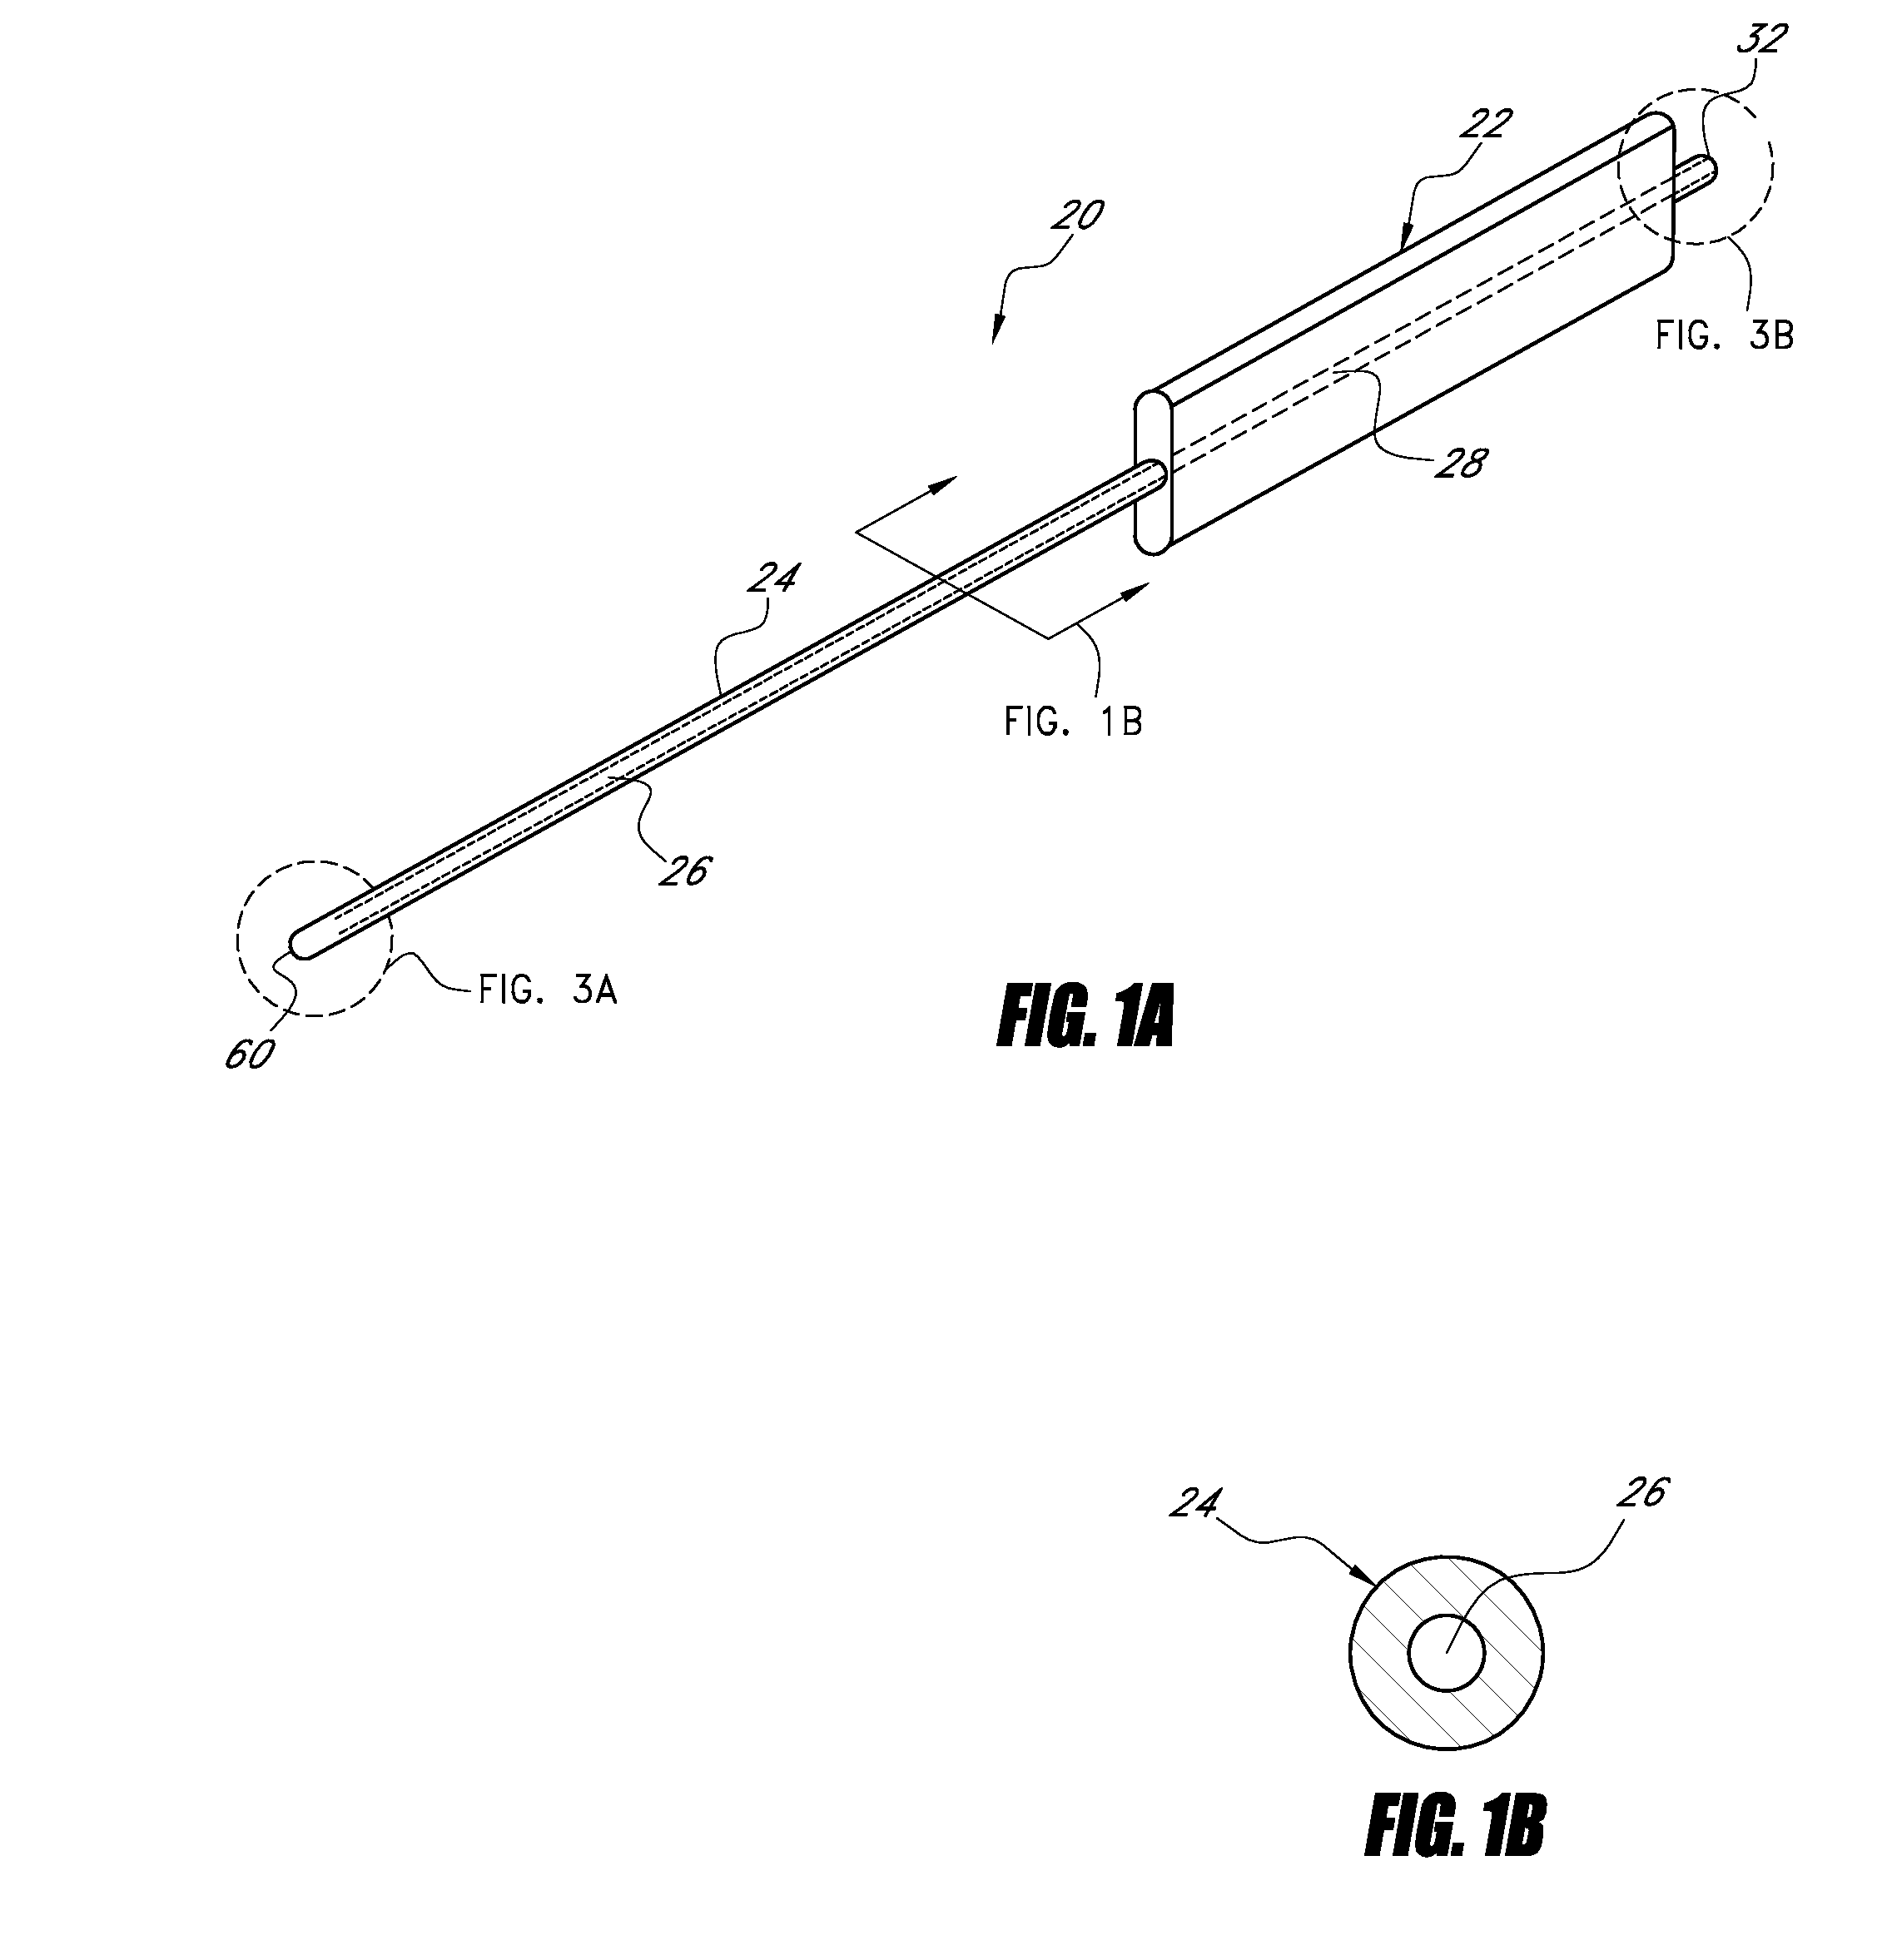 Soft tissue tunneling device